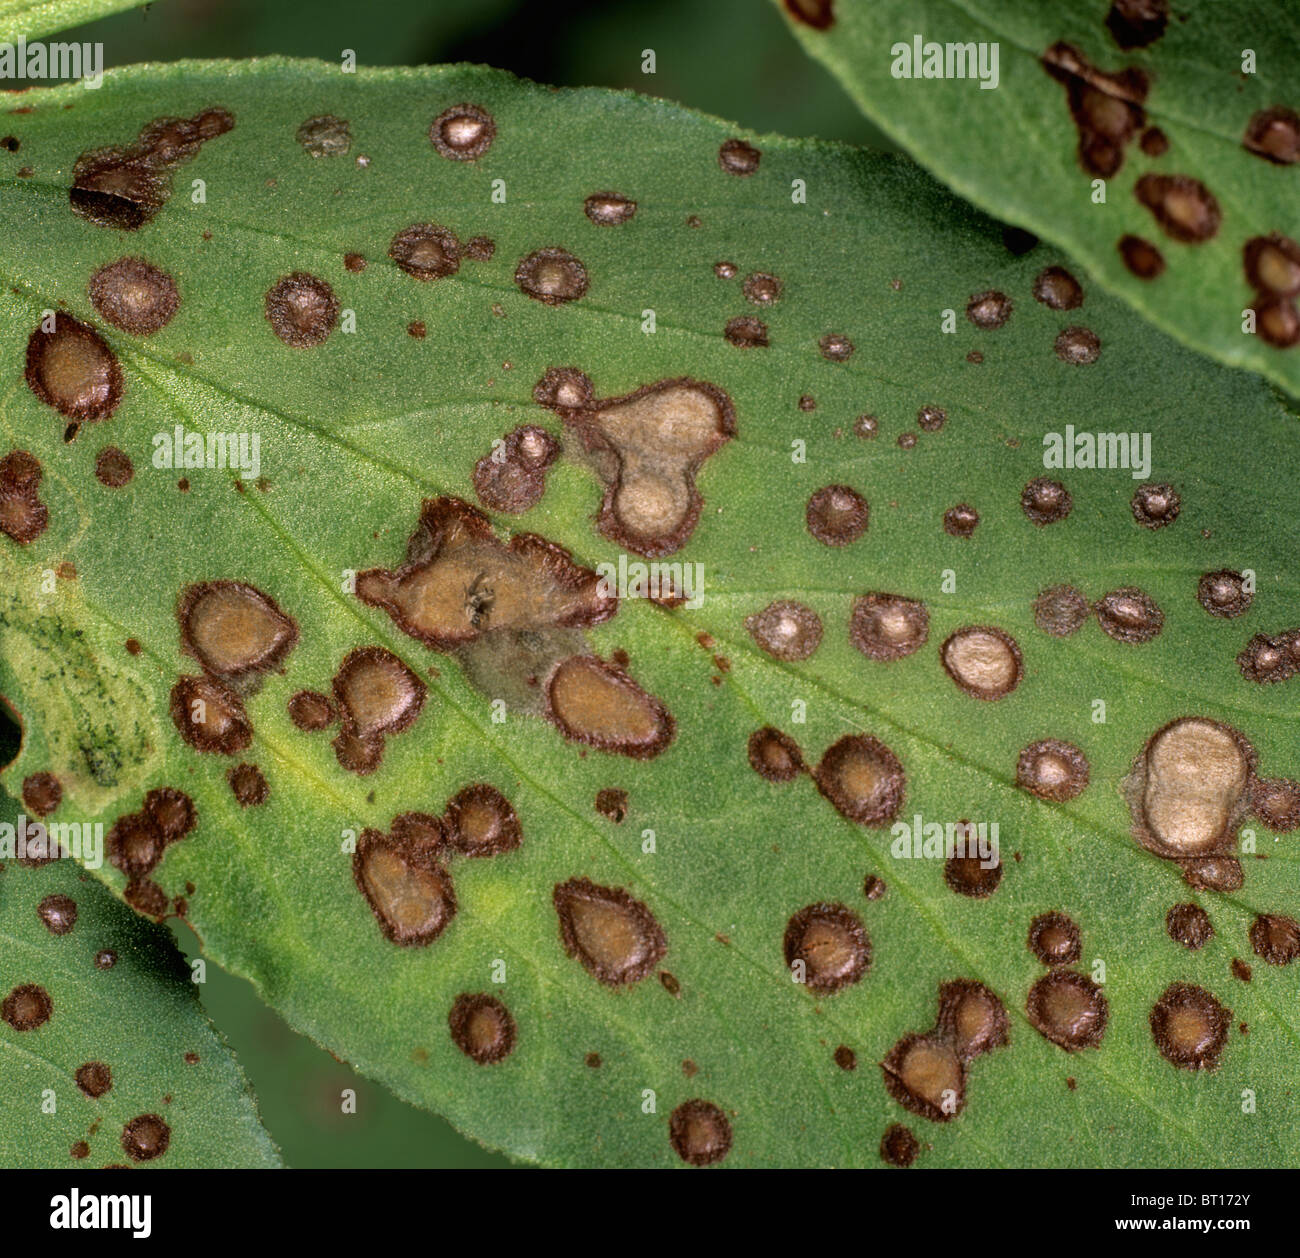 Chocolate spot (Botrytis fabae) lesions on broad bean leaves Stock Photo